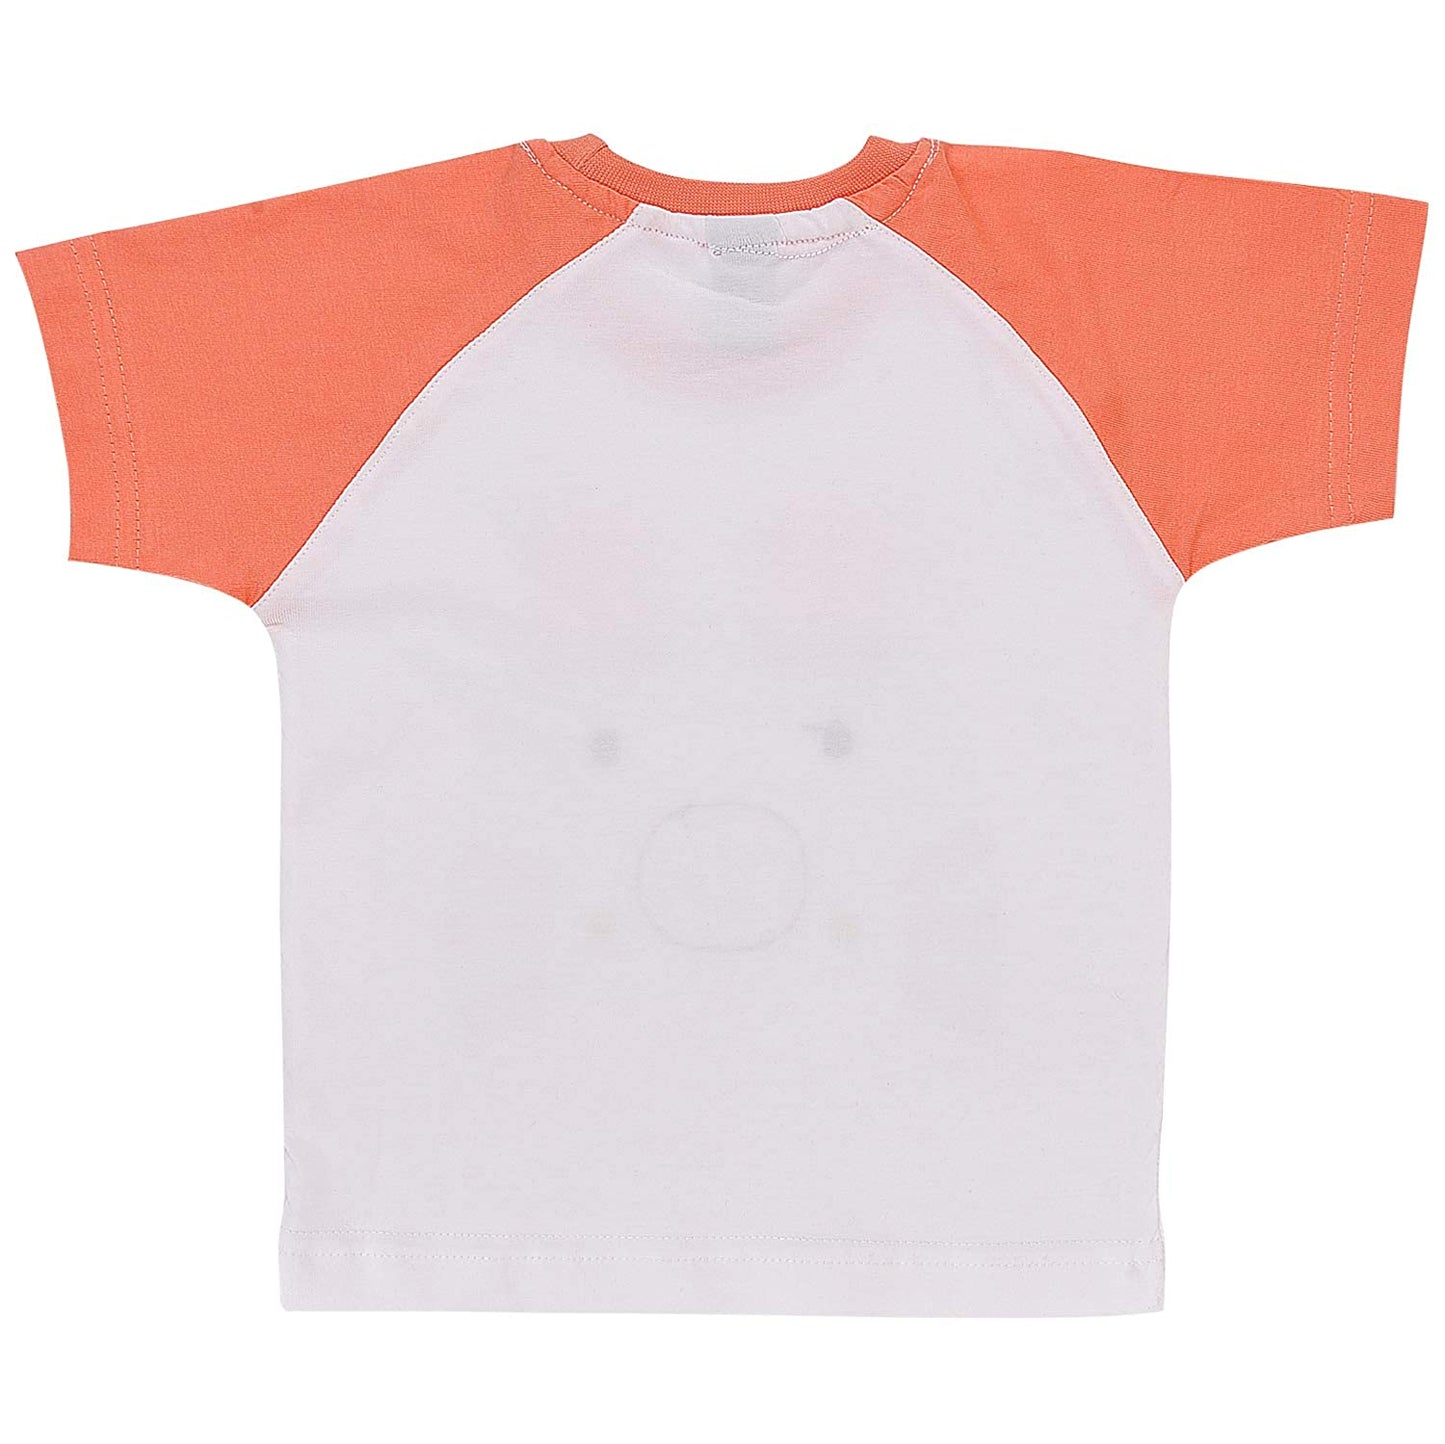 Wish Karo Clothing Sets for Baby Boys-(bt42org)